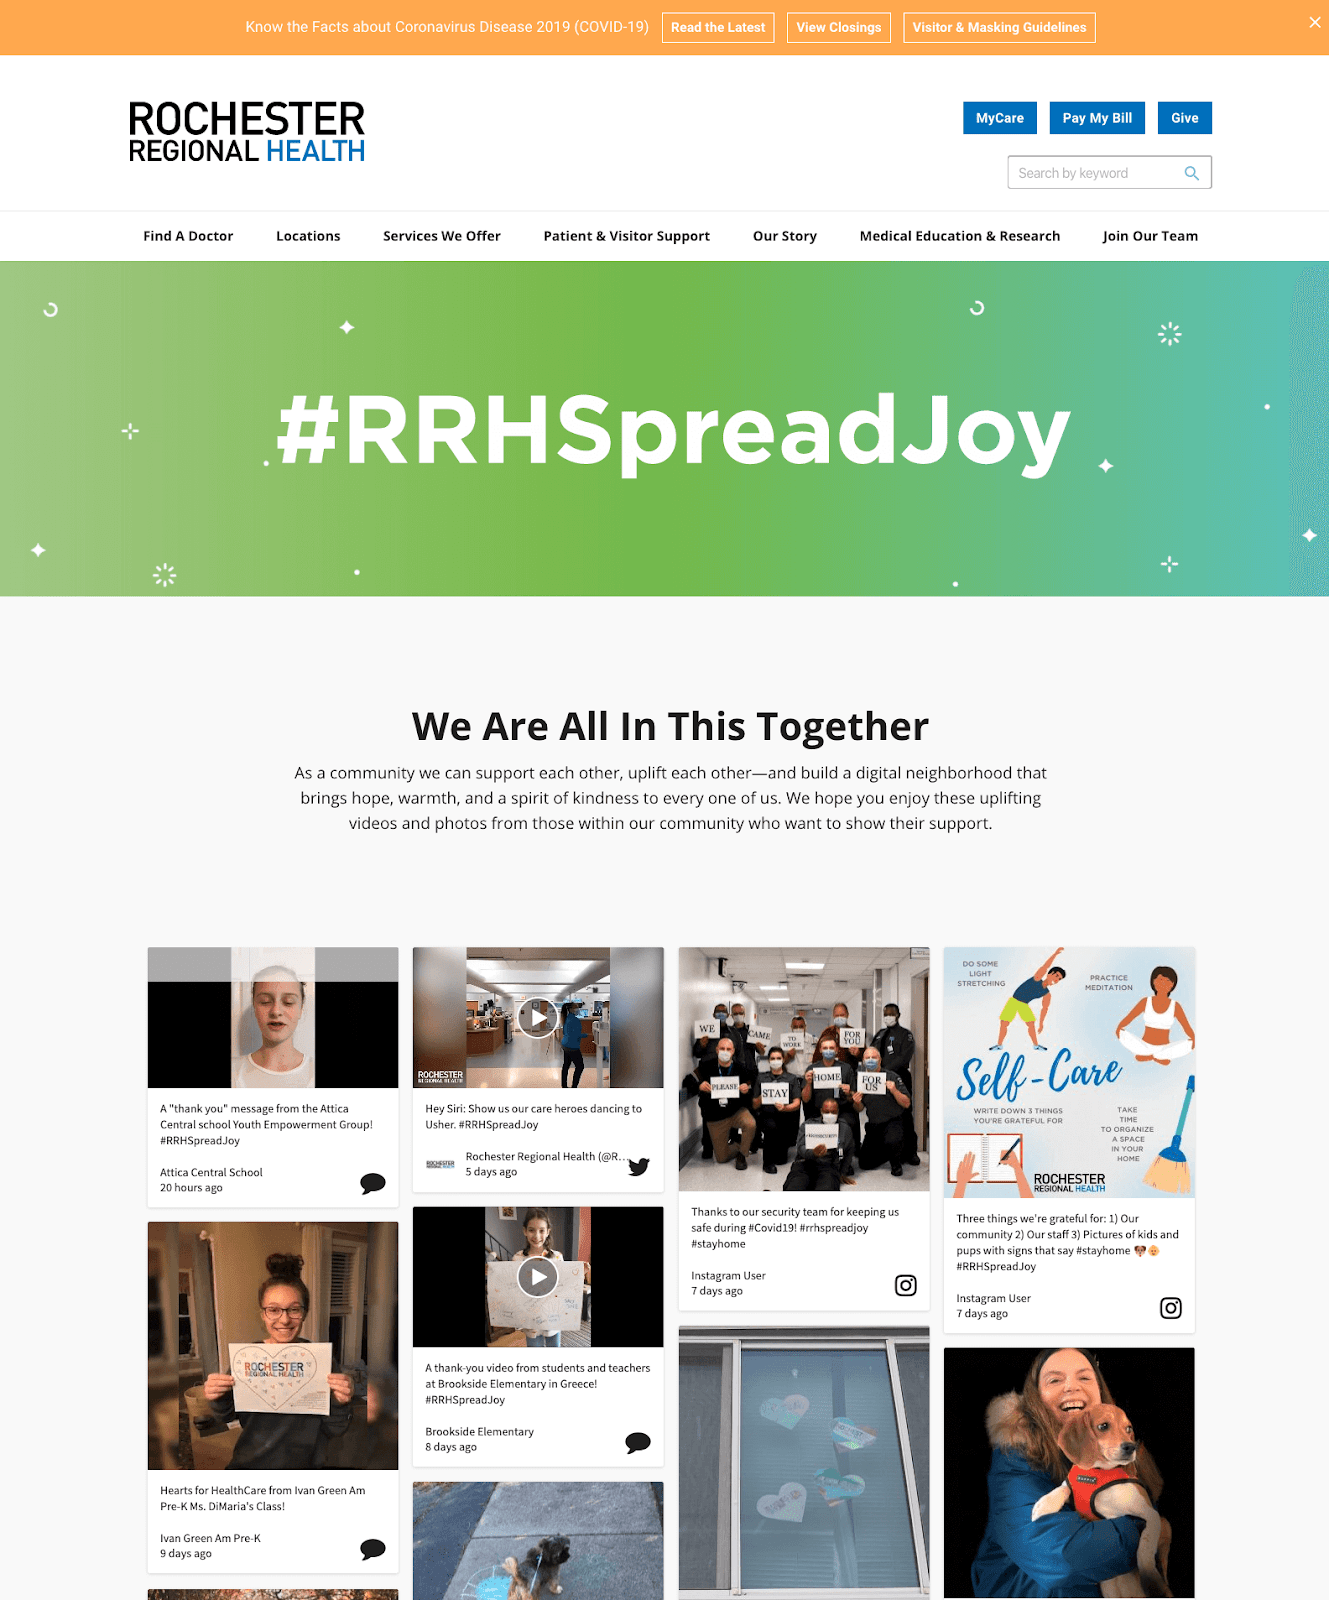 Screenshot of the Rochester Regional Health website, prominently featuring the #RRHSpreadJoy hashtag in a header and, underneath it, the social media wall with the headline “We Are All In This Together”.